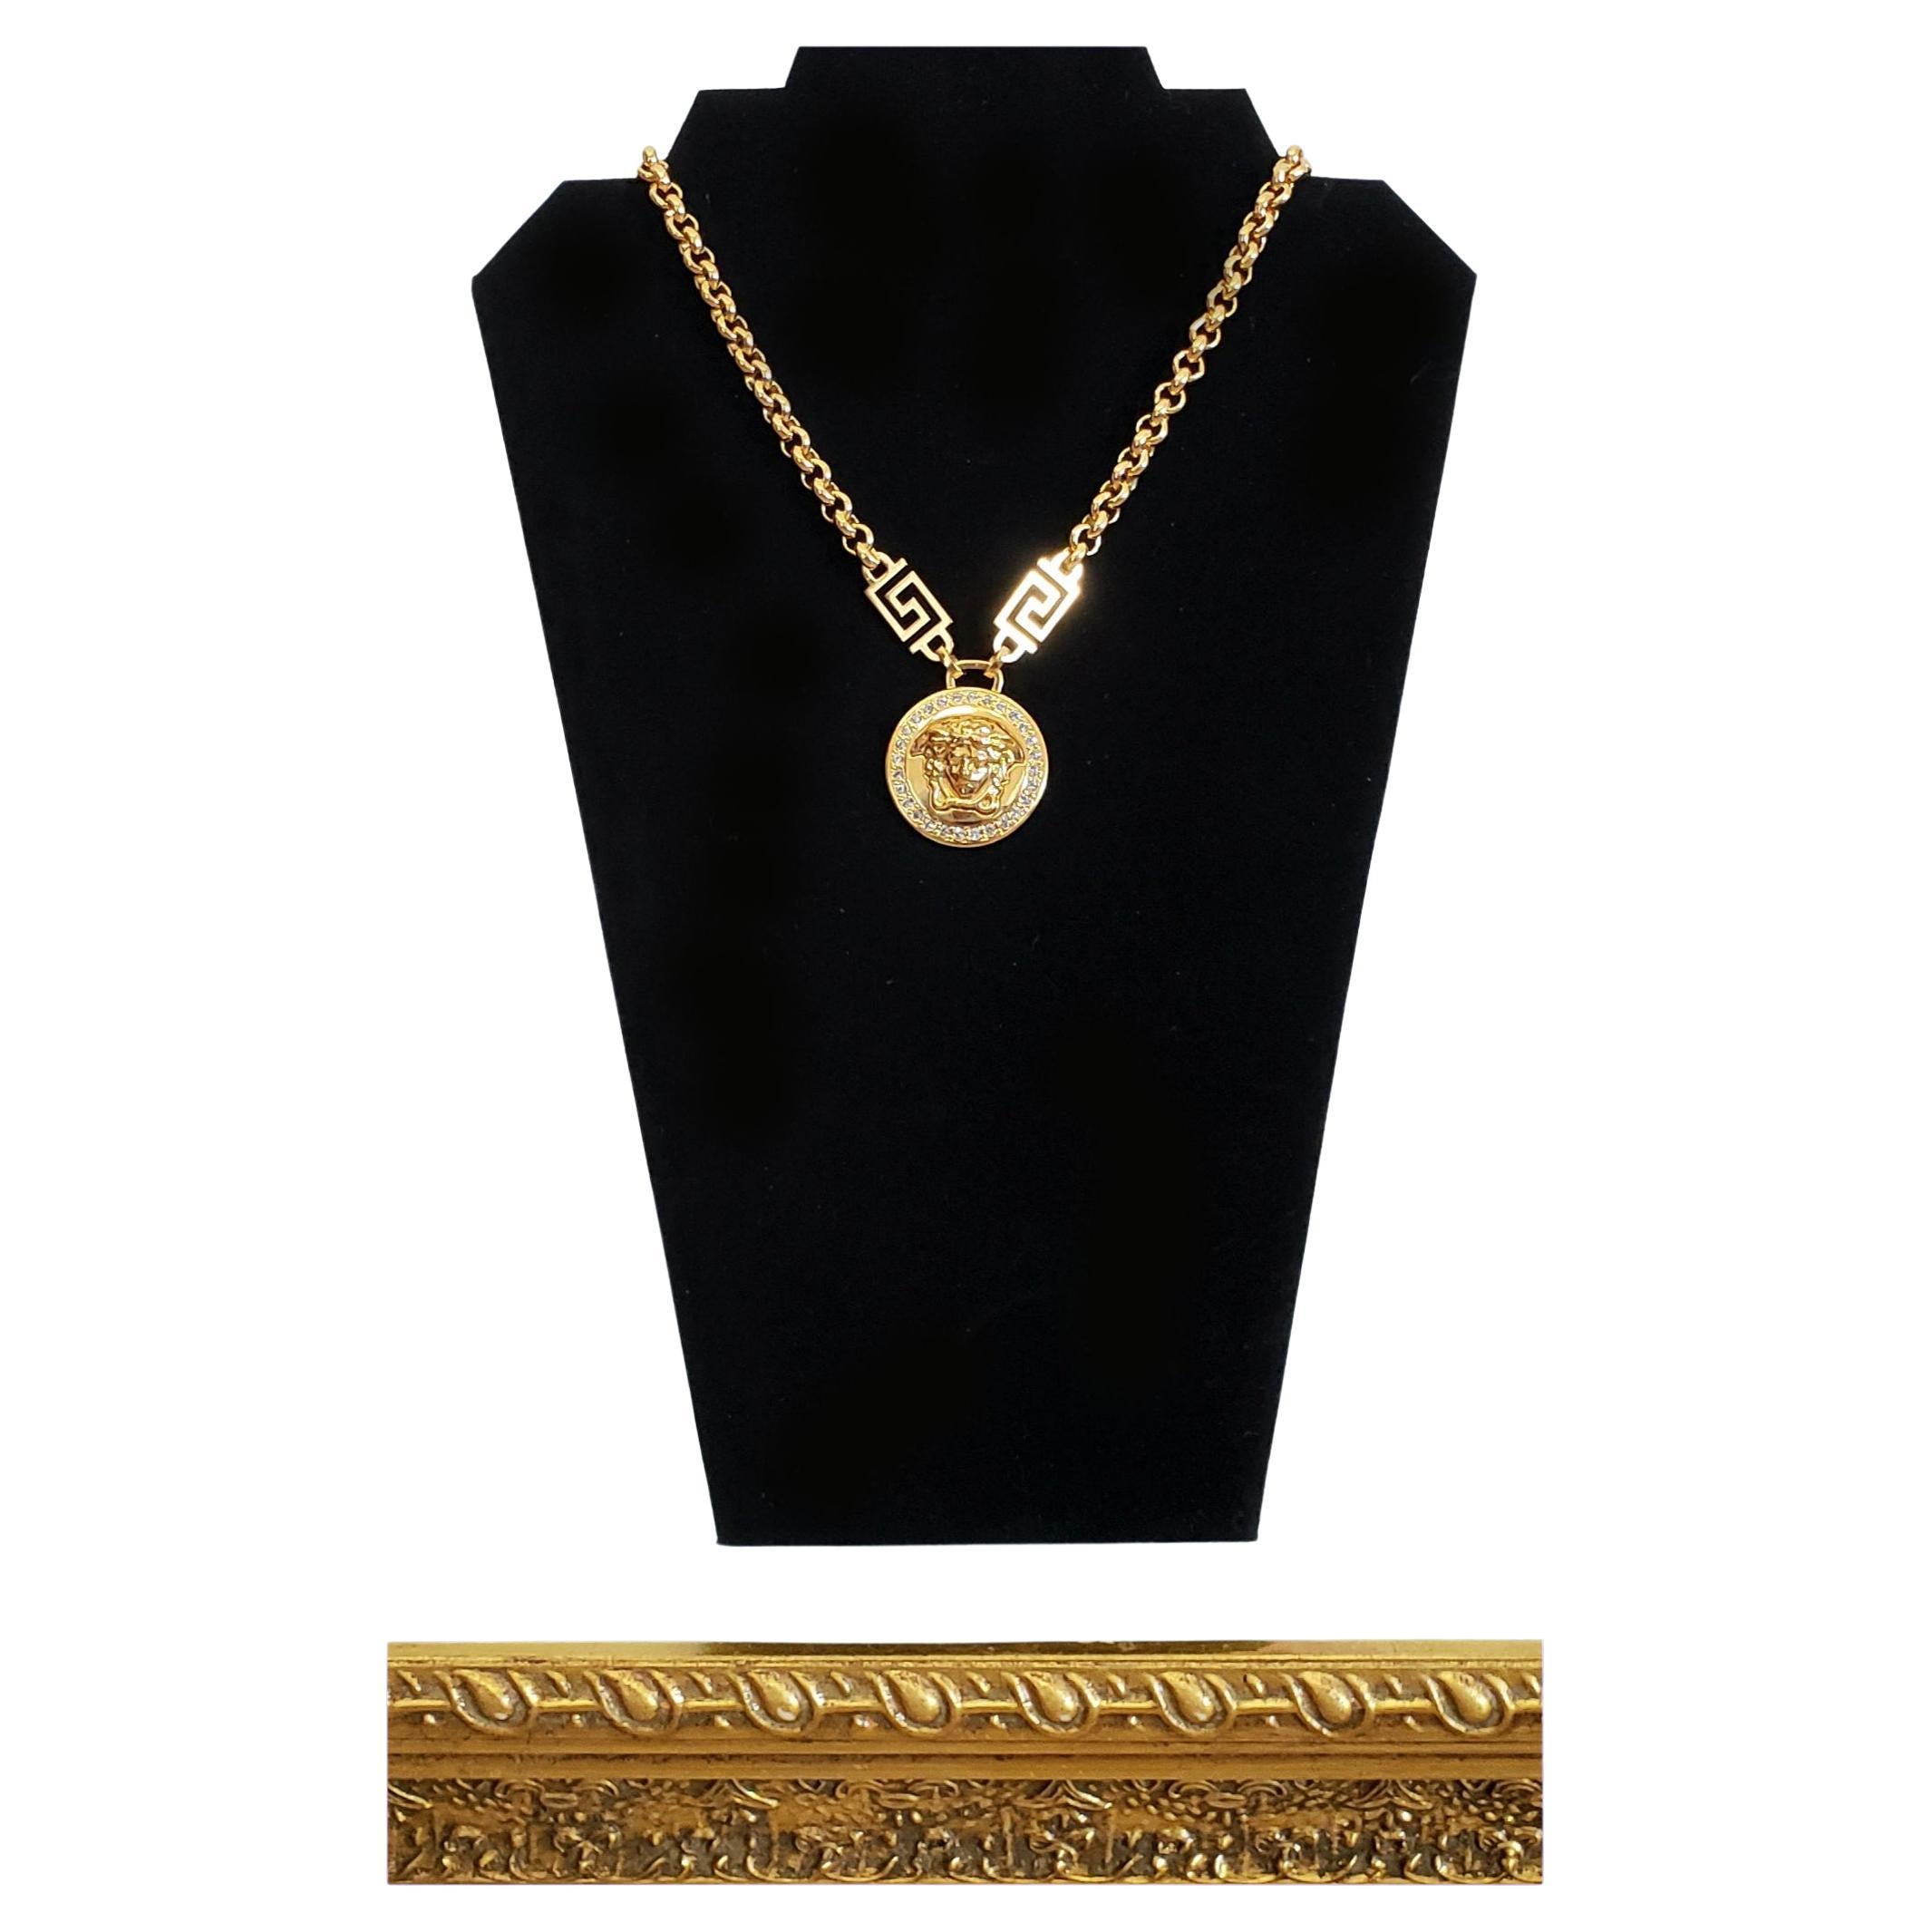 VERSACE 24K GOLD PLATED CHAIN GREEK KEY CRYSTALL MEDUSA Necklace